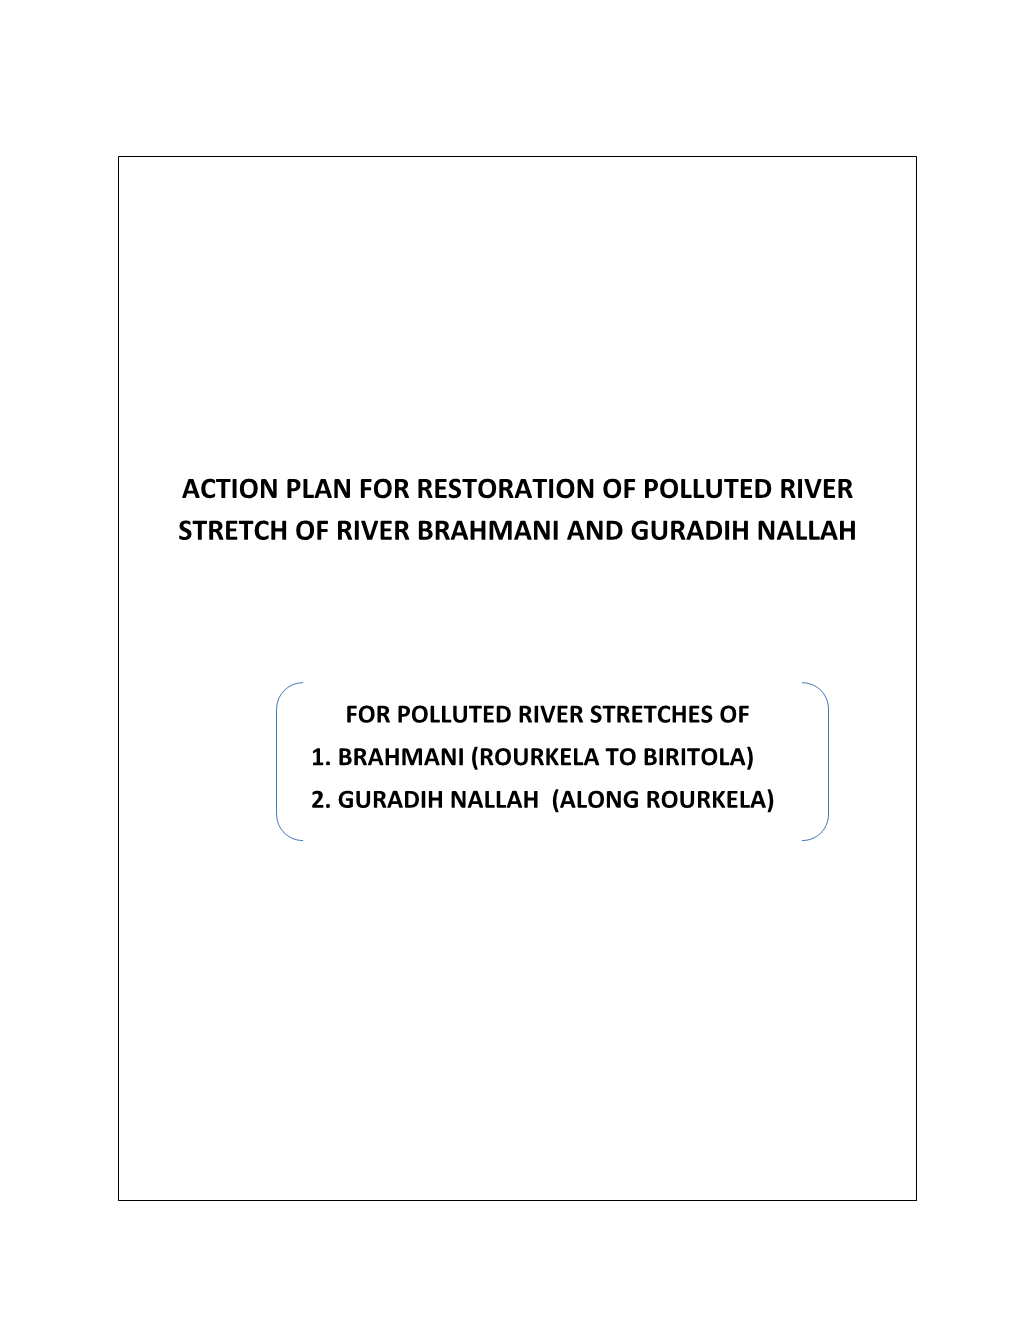 Action Plan for Restoration of Polluted River Stretch of River Brahmani and Guradih Nallah